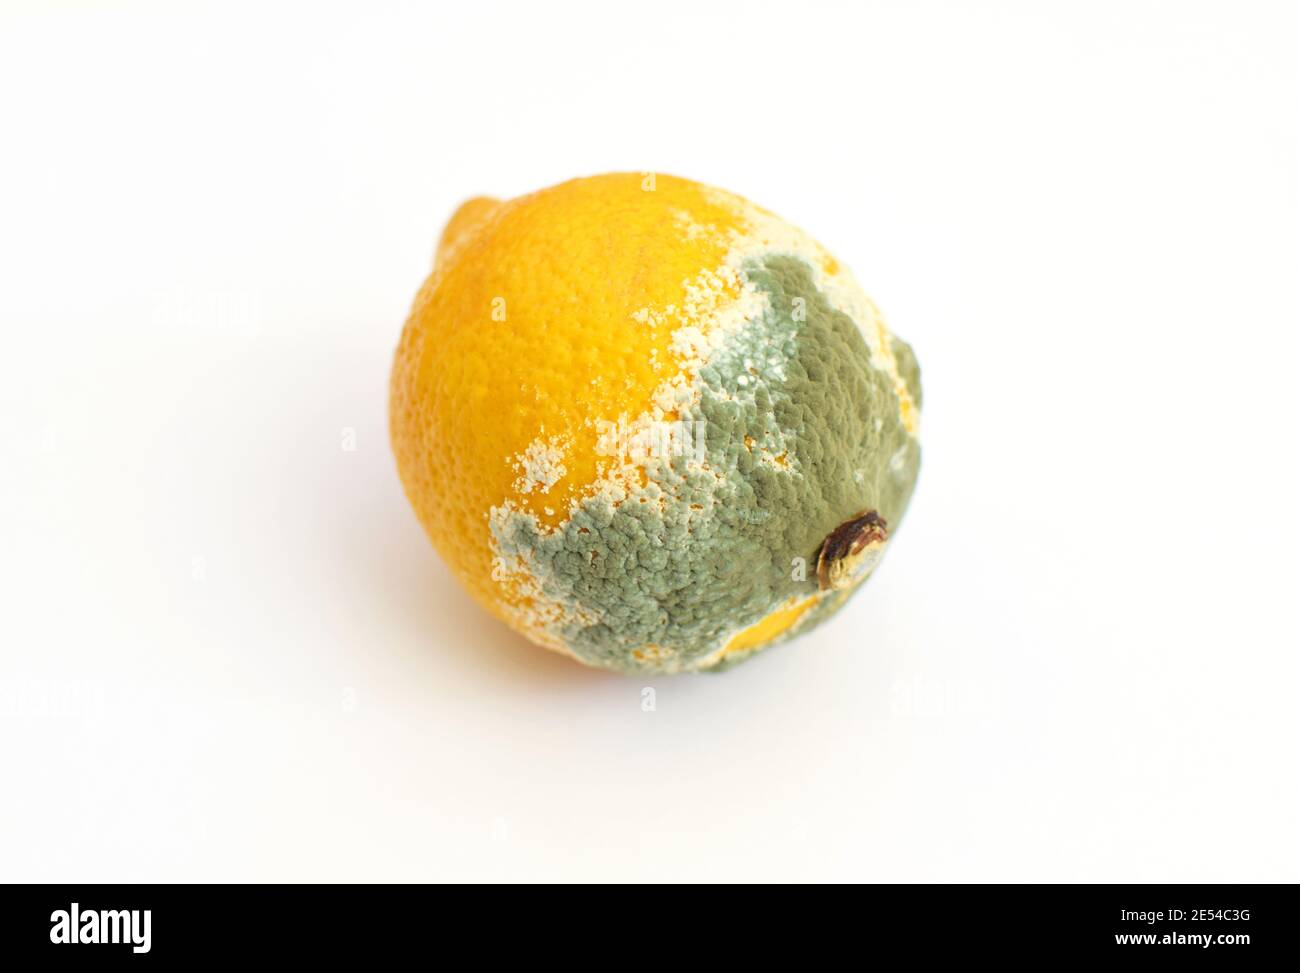 Blue mold on yellow lemon. Spoiled rotting fruit with mold on a white background. Blue-green mold on citrus fruits. Stock Photo